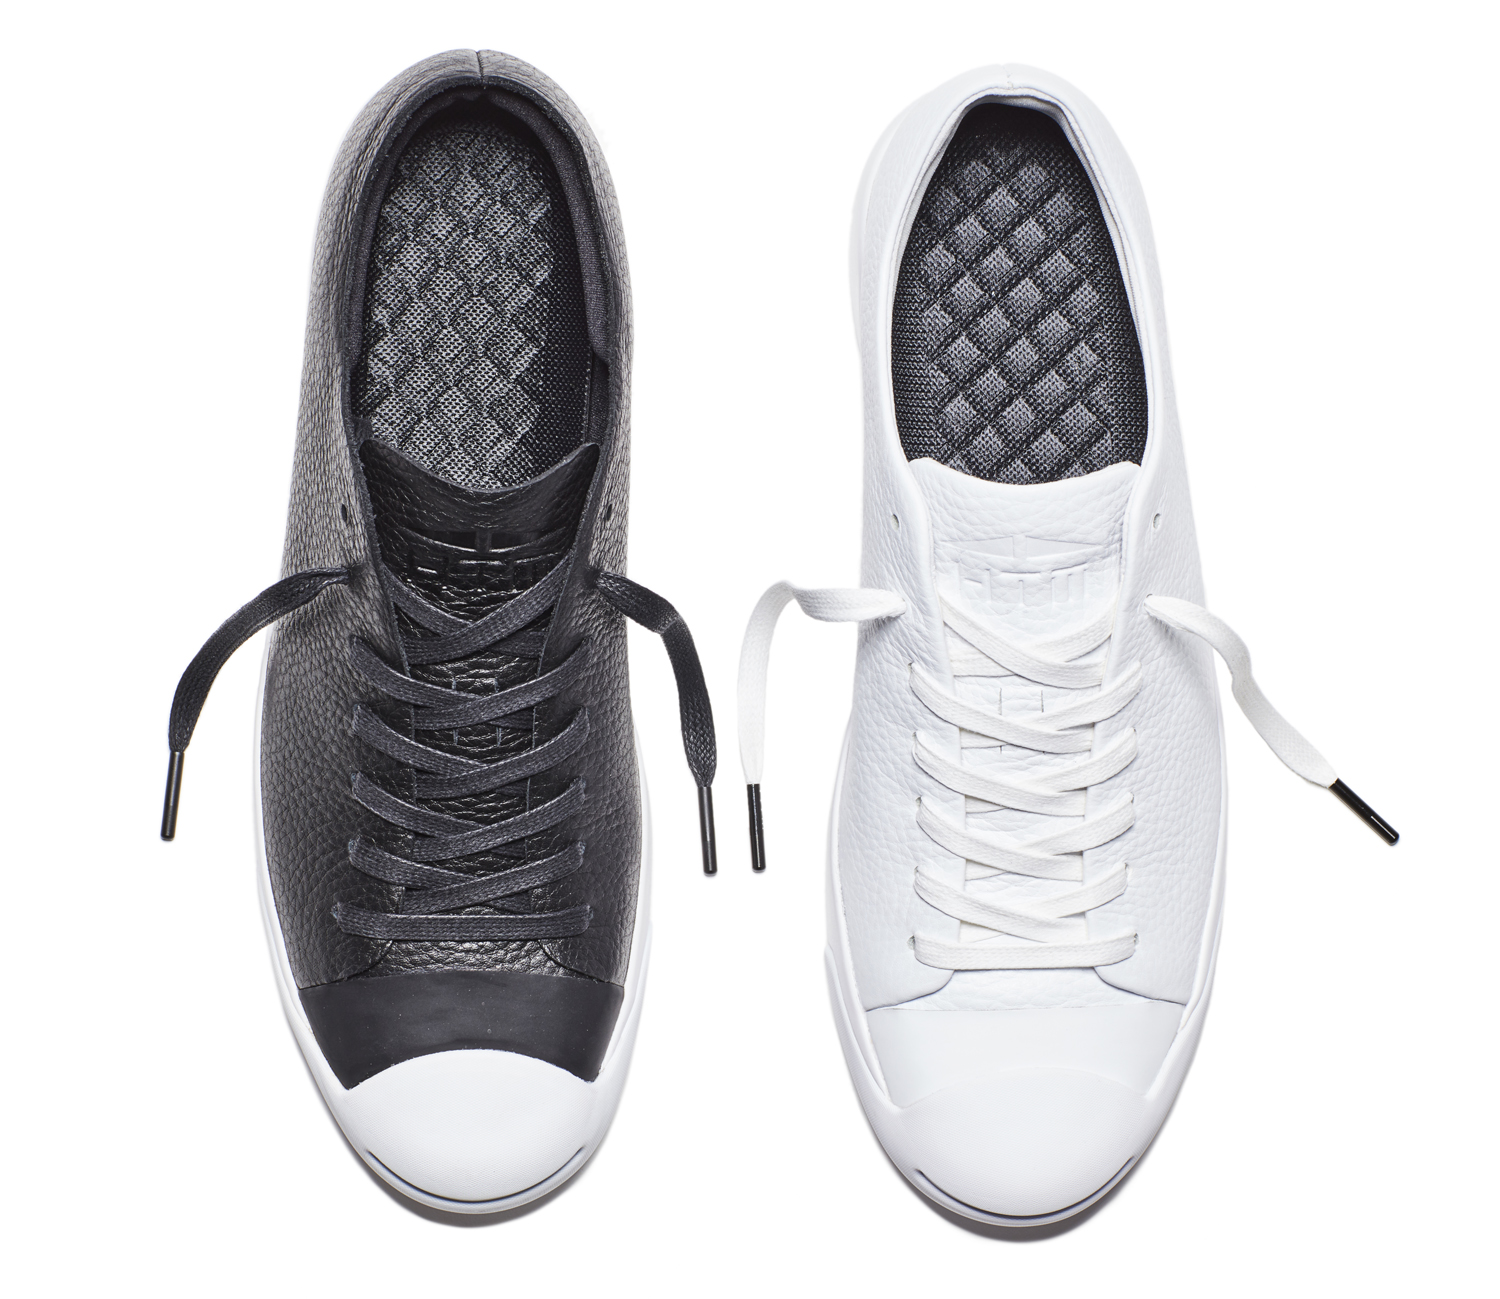 converse jack purcell nike